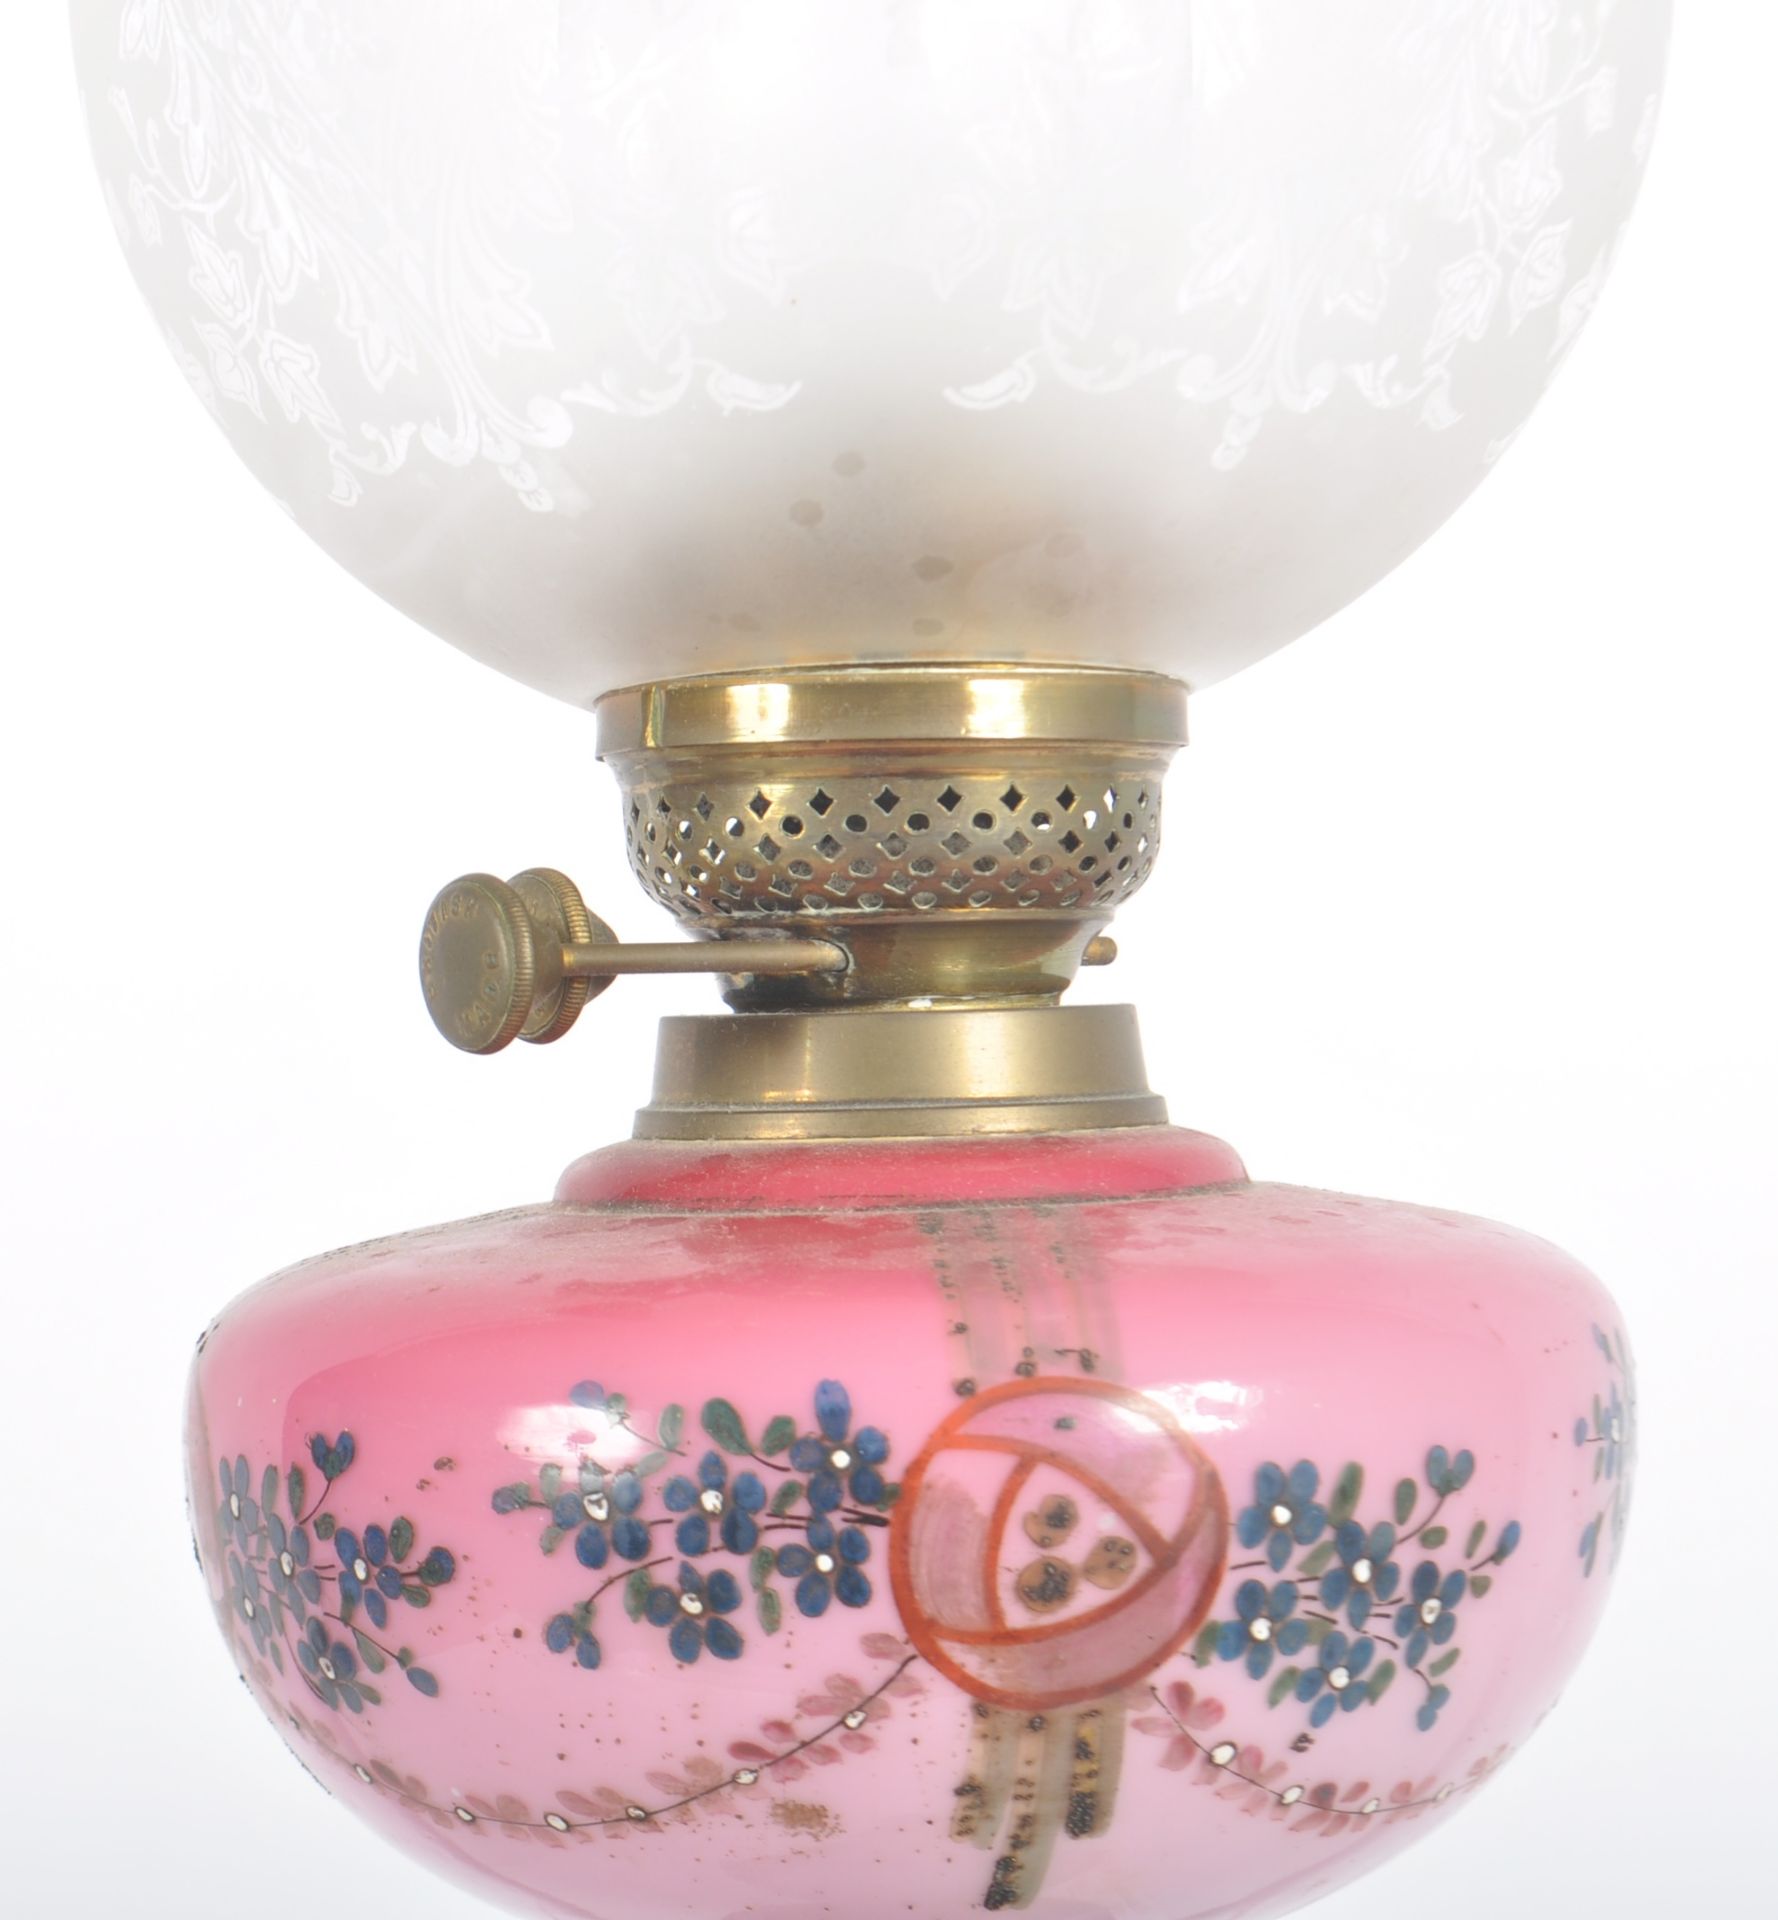 19TH CENTURY VICTORIAN NEOCLASSICAL OIL LAMP - Image 8 of 8